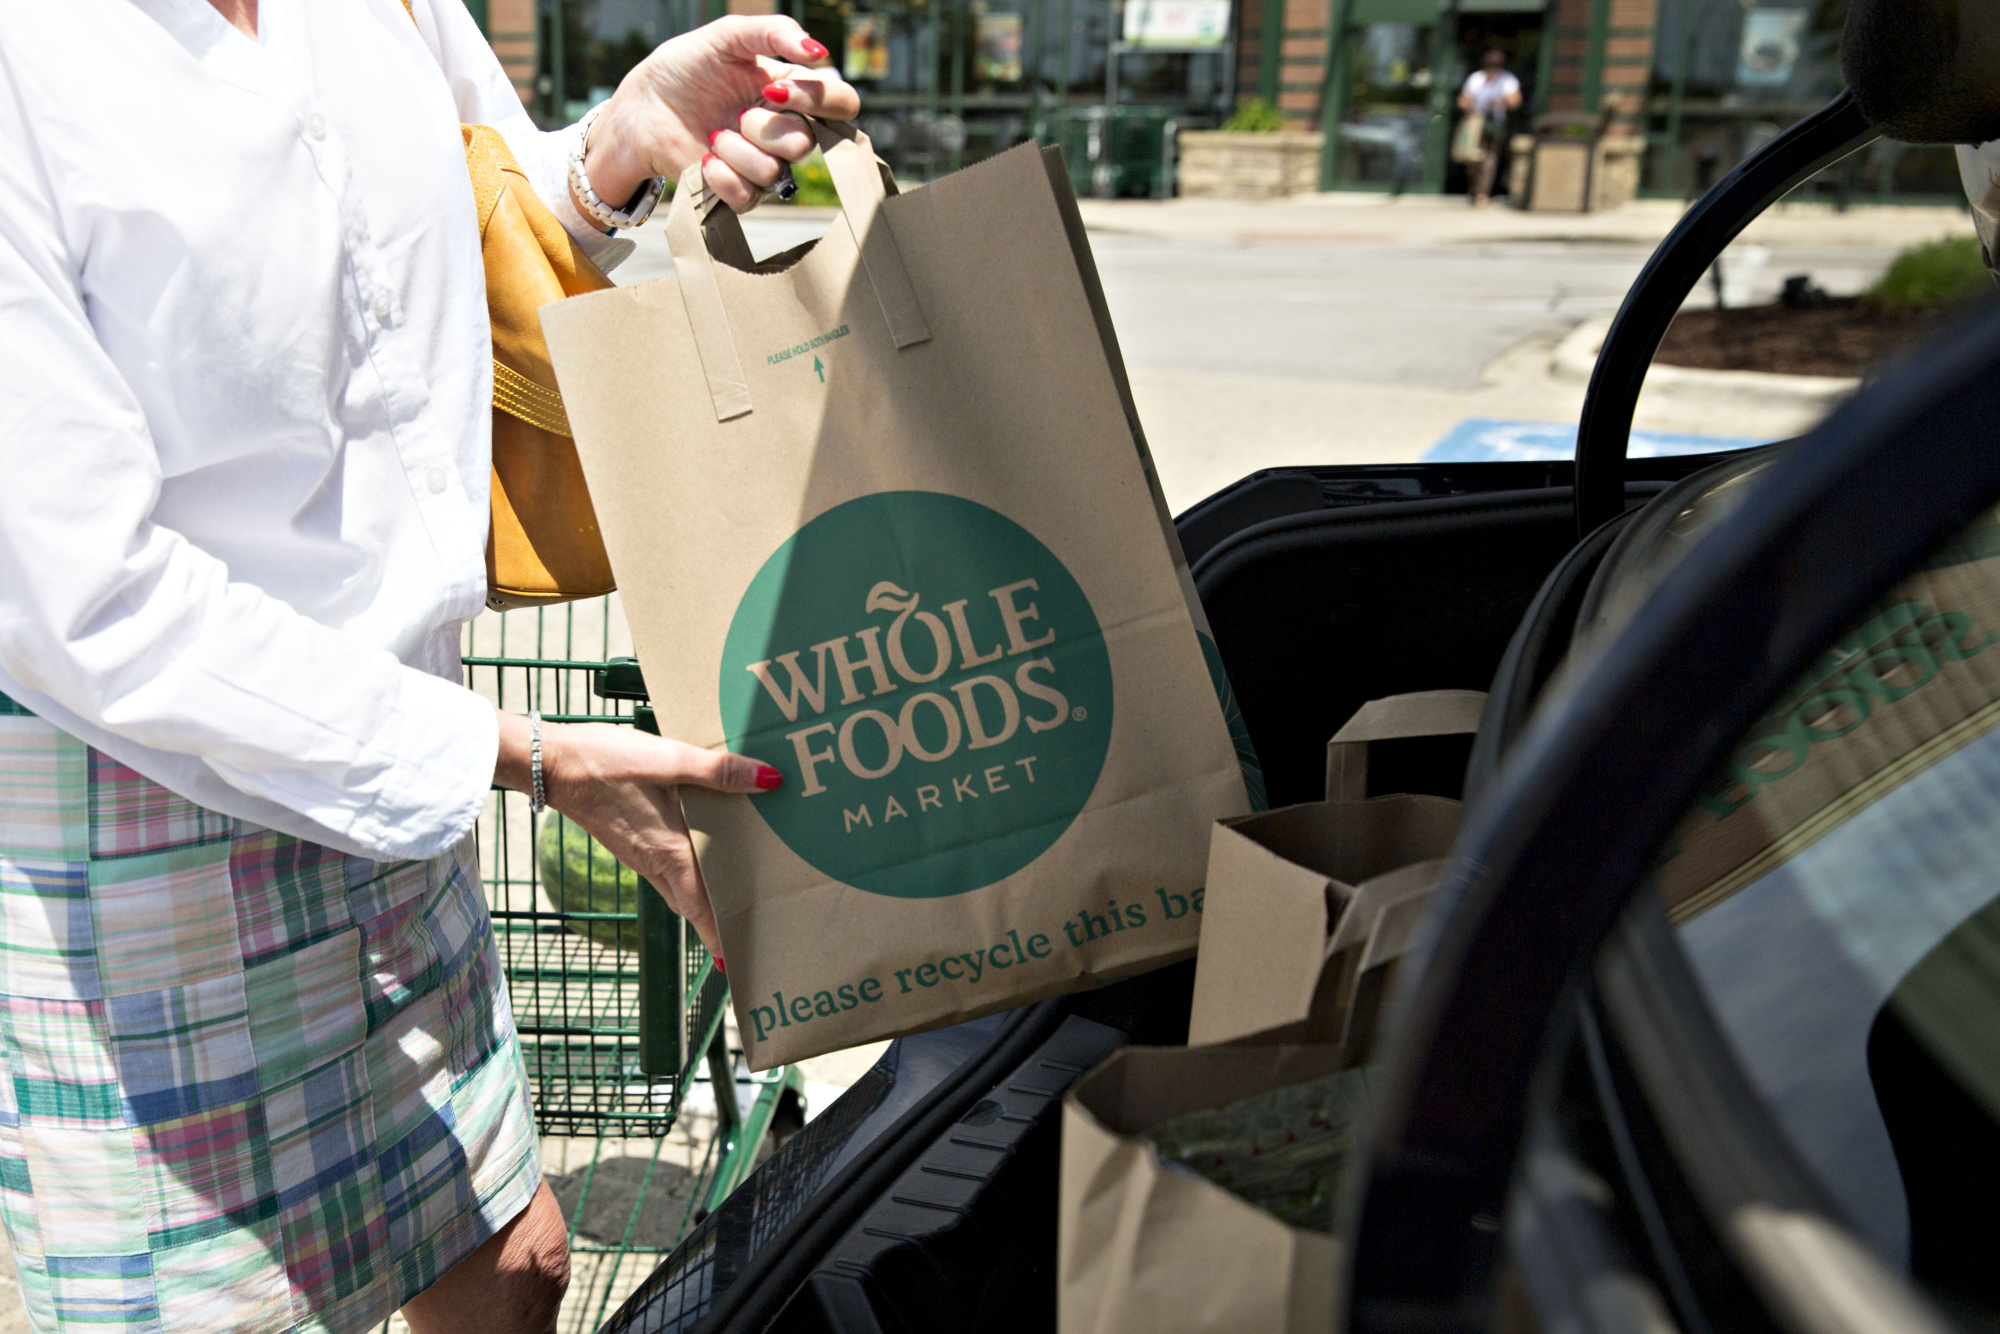 A customer loads shopping bags into a vehicle outside a Whole Foods Market Inc. location in Naperville, Illinois, U.S., on Friday, June 16, 2017. Amazon.com Inc. will acquire Whole Foods Market Inc. for $13.7 billion, a bombshell of a deal that catapults the e-commerce giant into hundreds of physical stores and fulfills a long-held goal of selling more groceries.